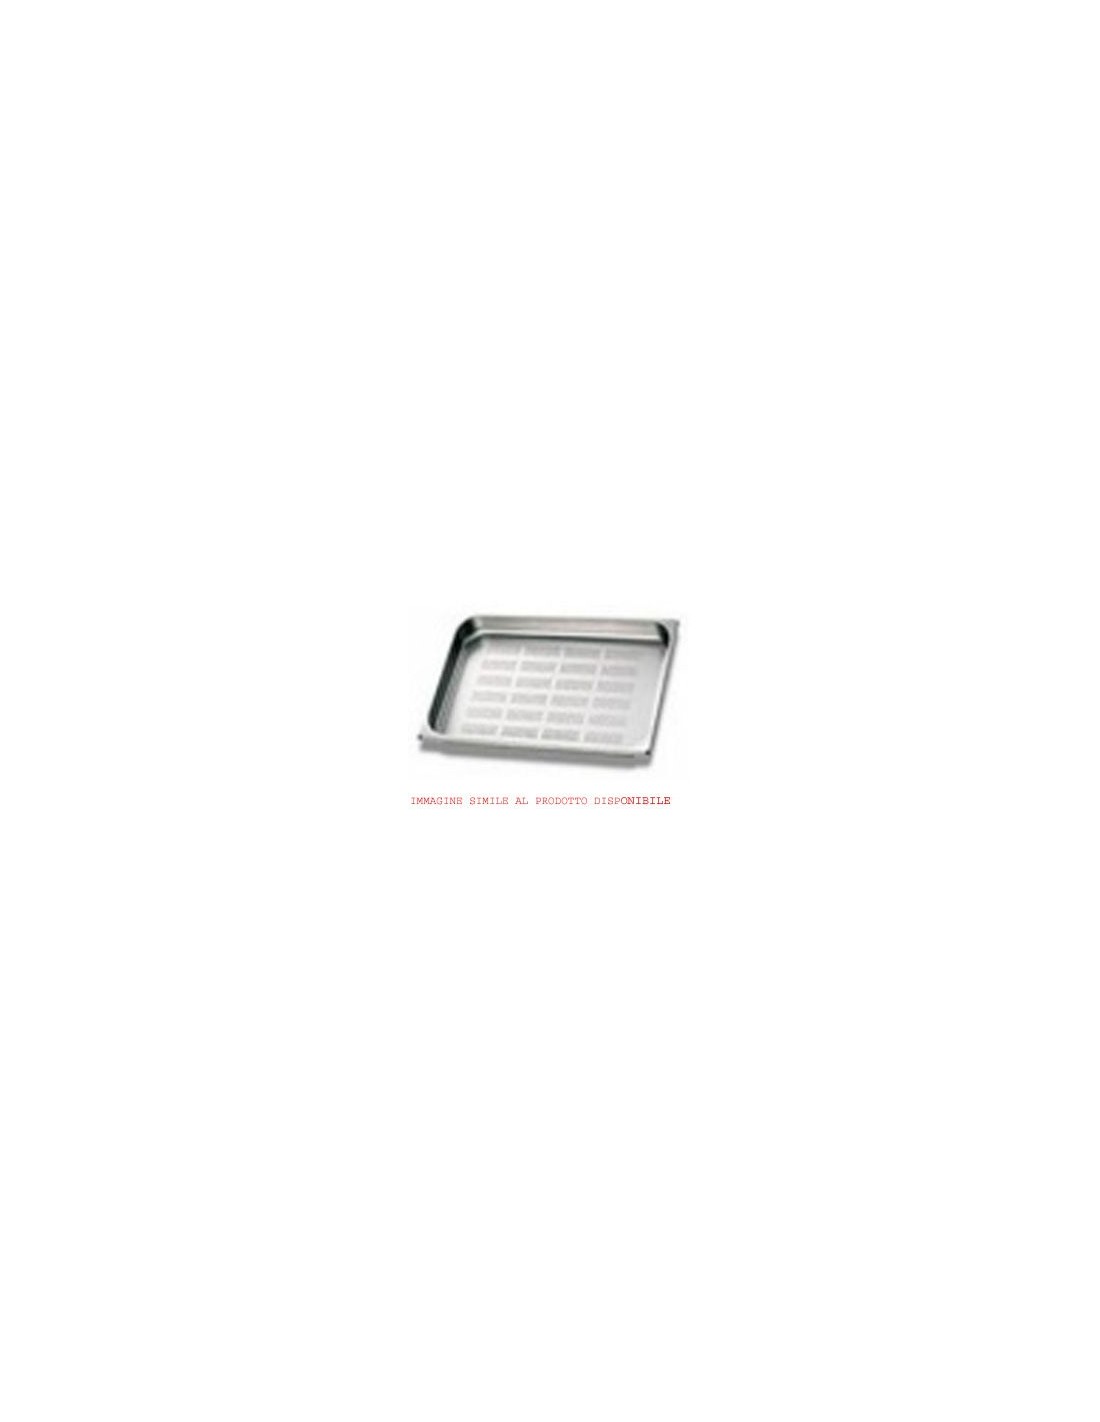 Perforated sheet gn 2/3 cm 35.2x32.5x6.5h